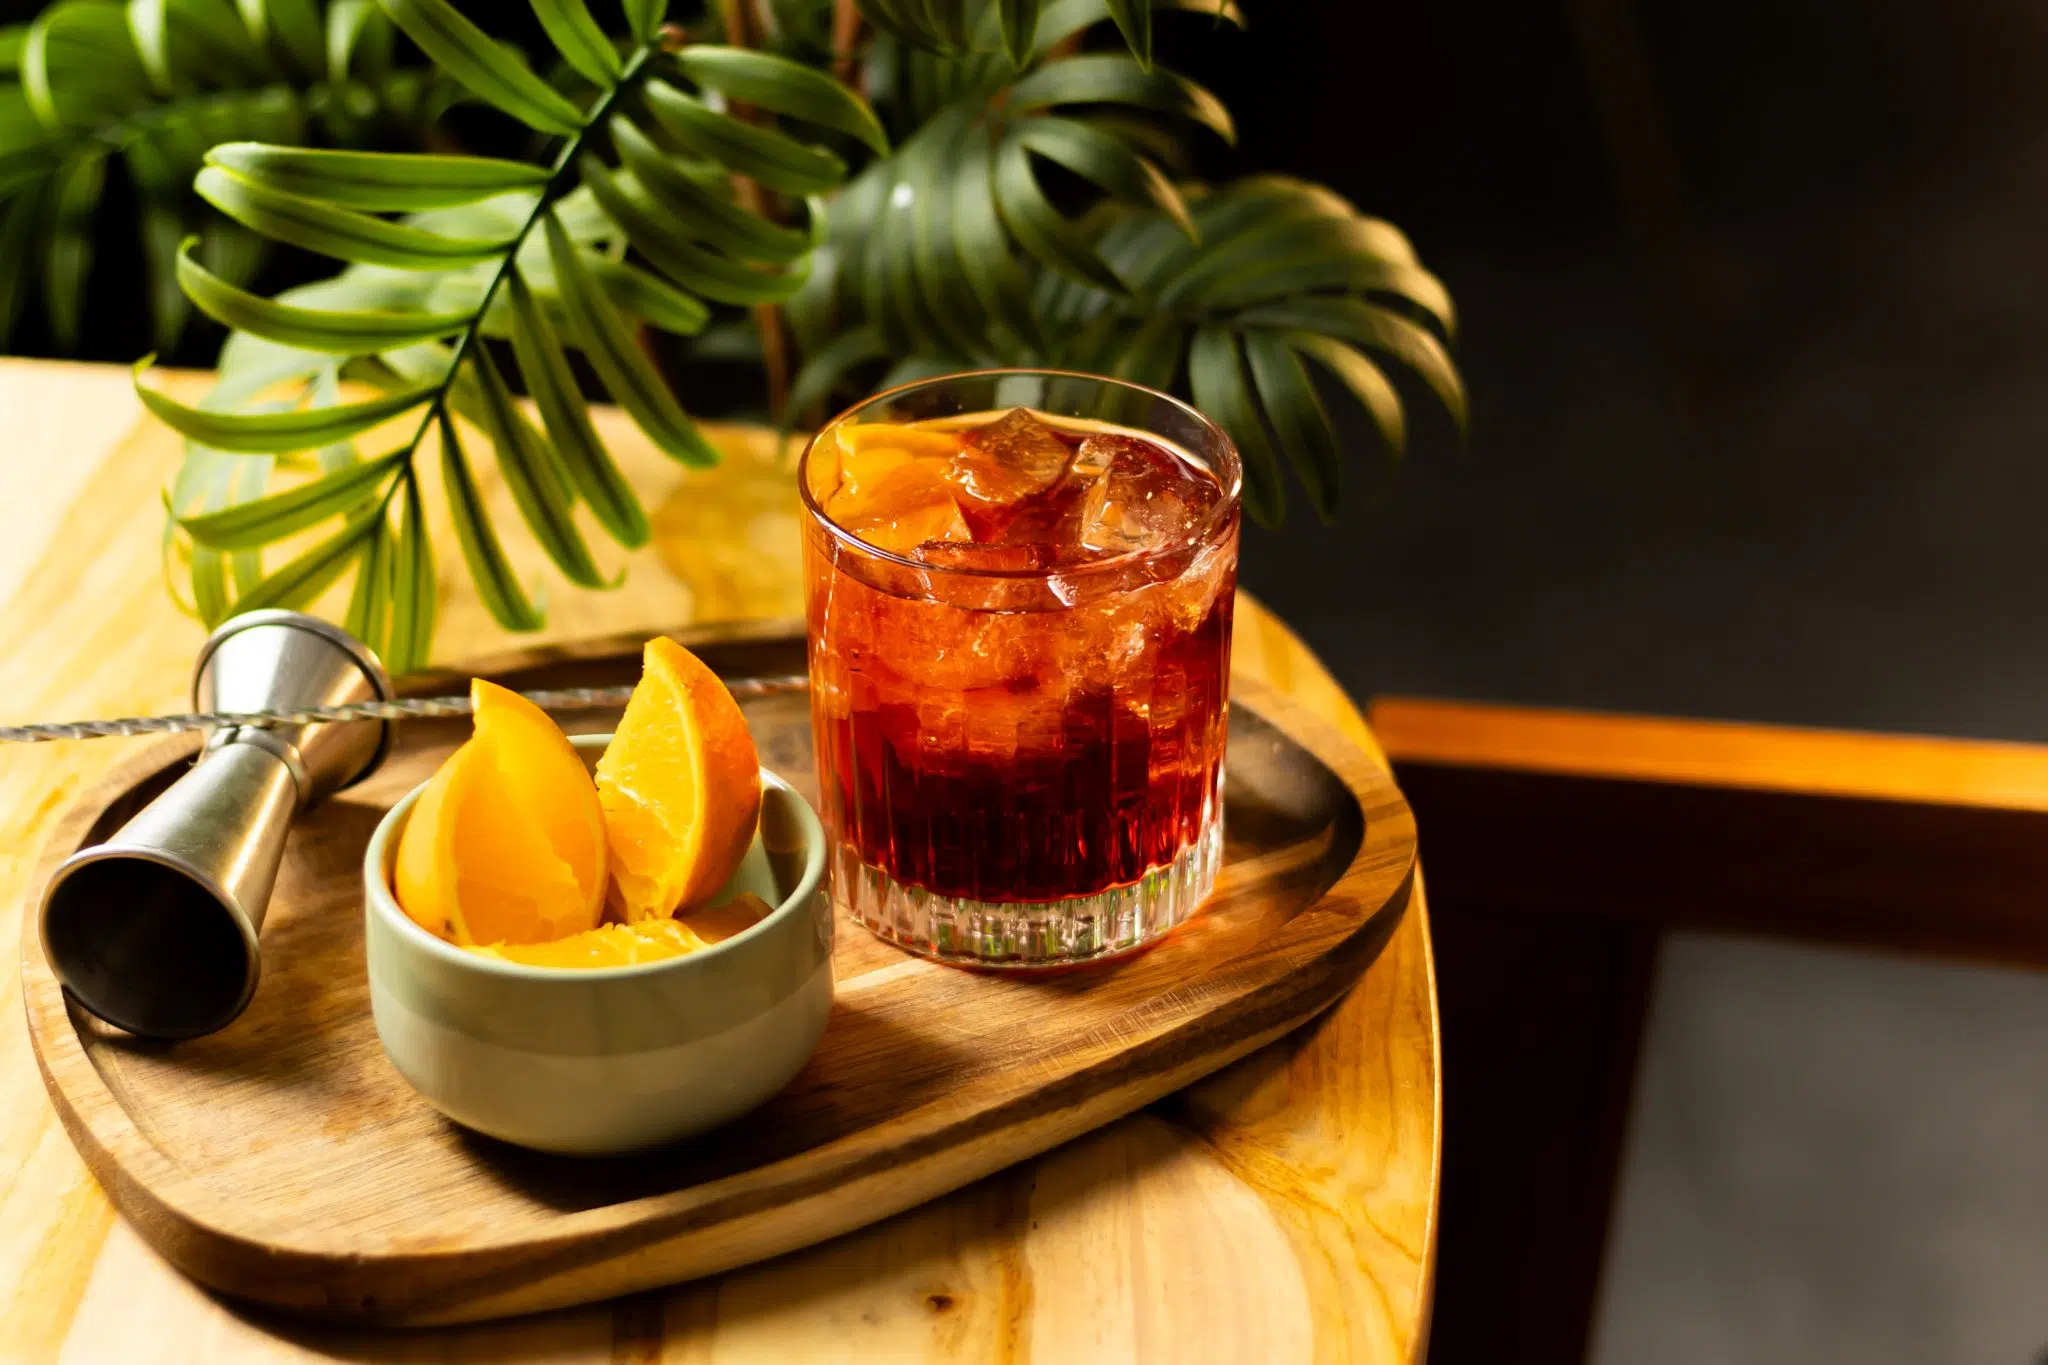 A side shot of a Negroni Sbagliato cocktail in an old fashioned glass on a wooden tray surrounded by a jigger, a bar spoon and a bowl with orange wedges.